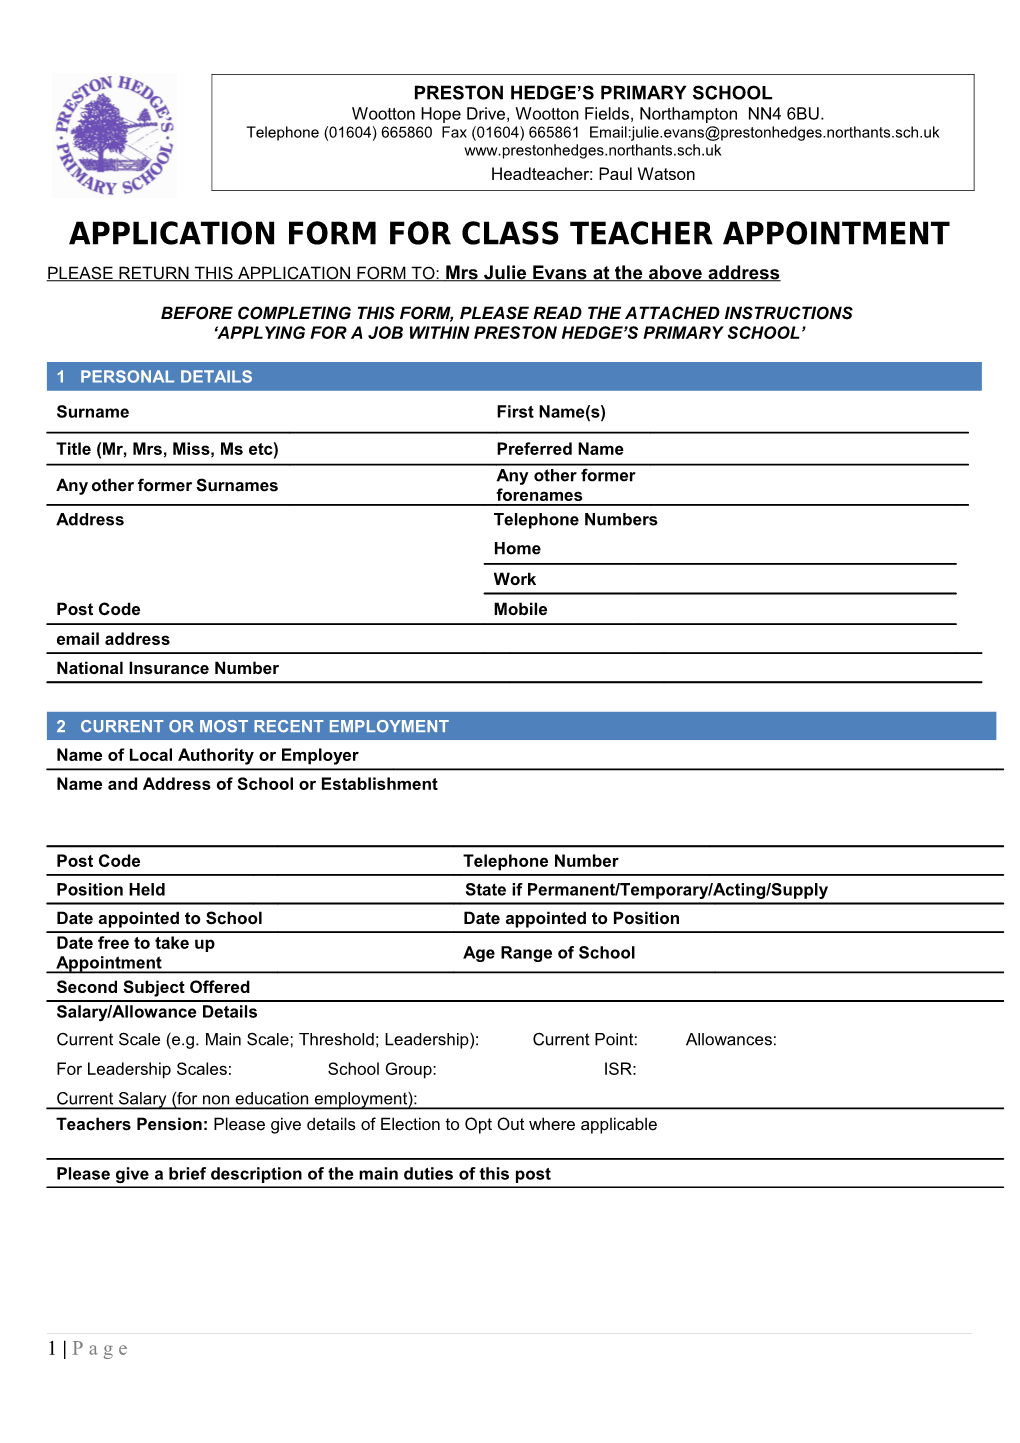 Application Form for Class Teacher Appointment